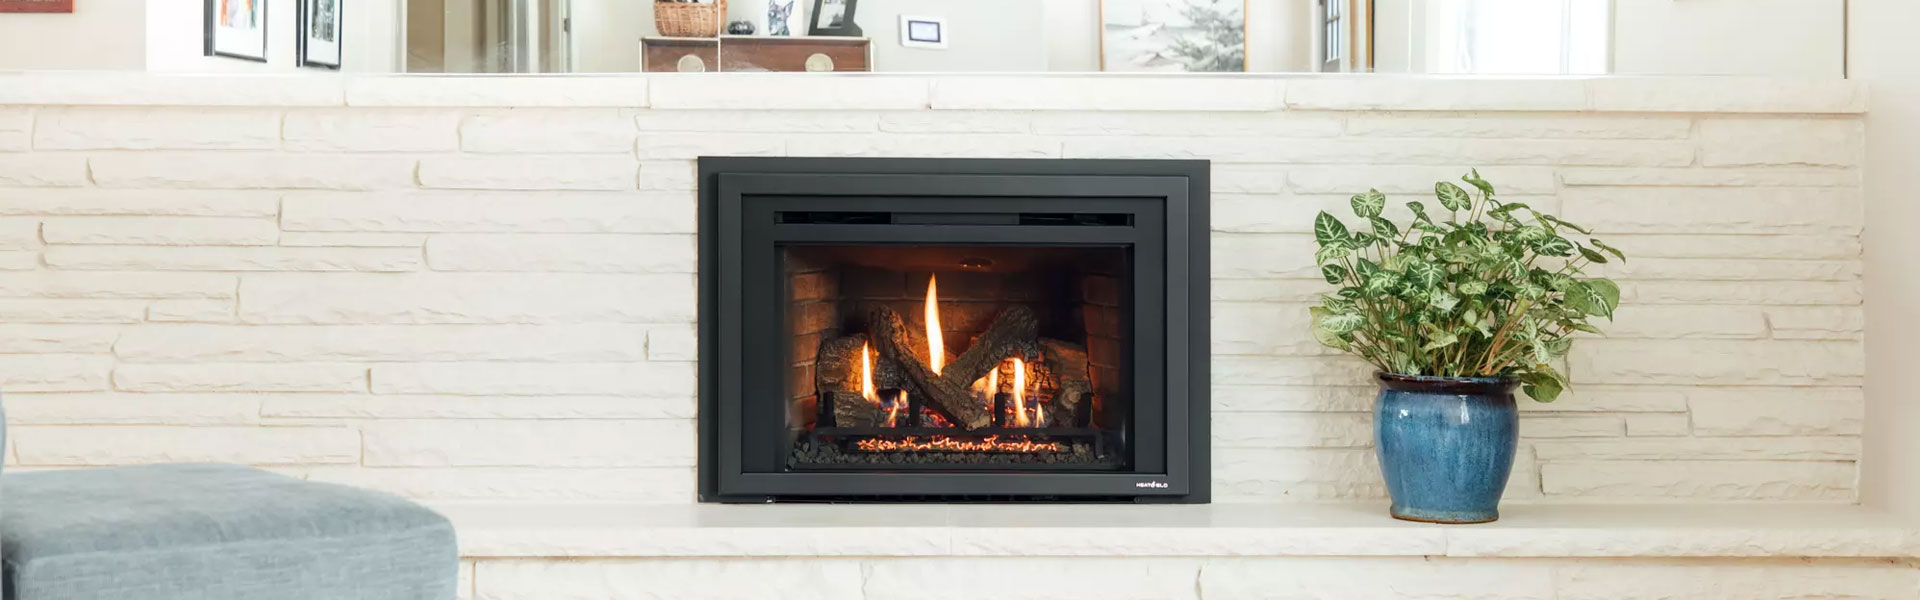 How to Install a Gas Fireplace Insert